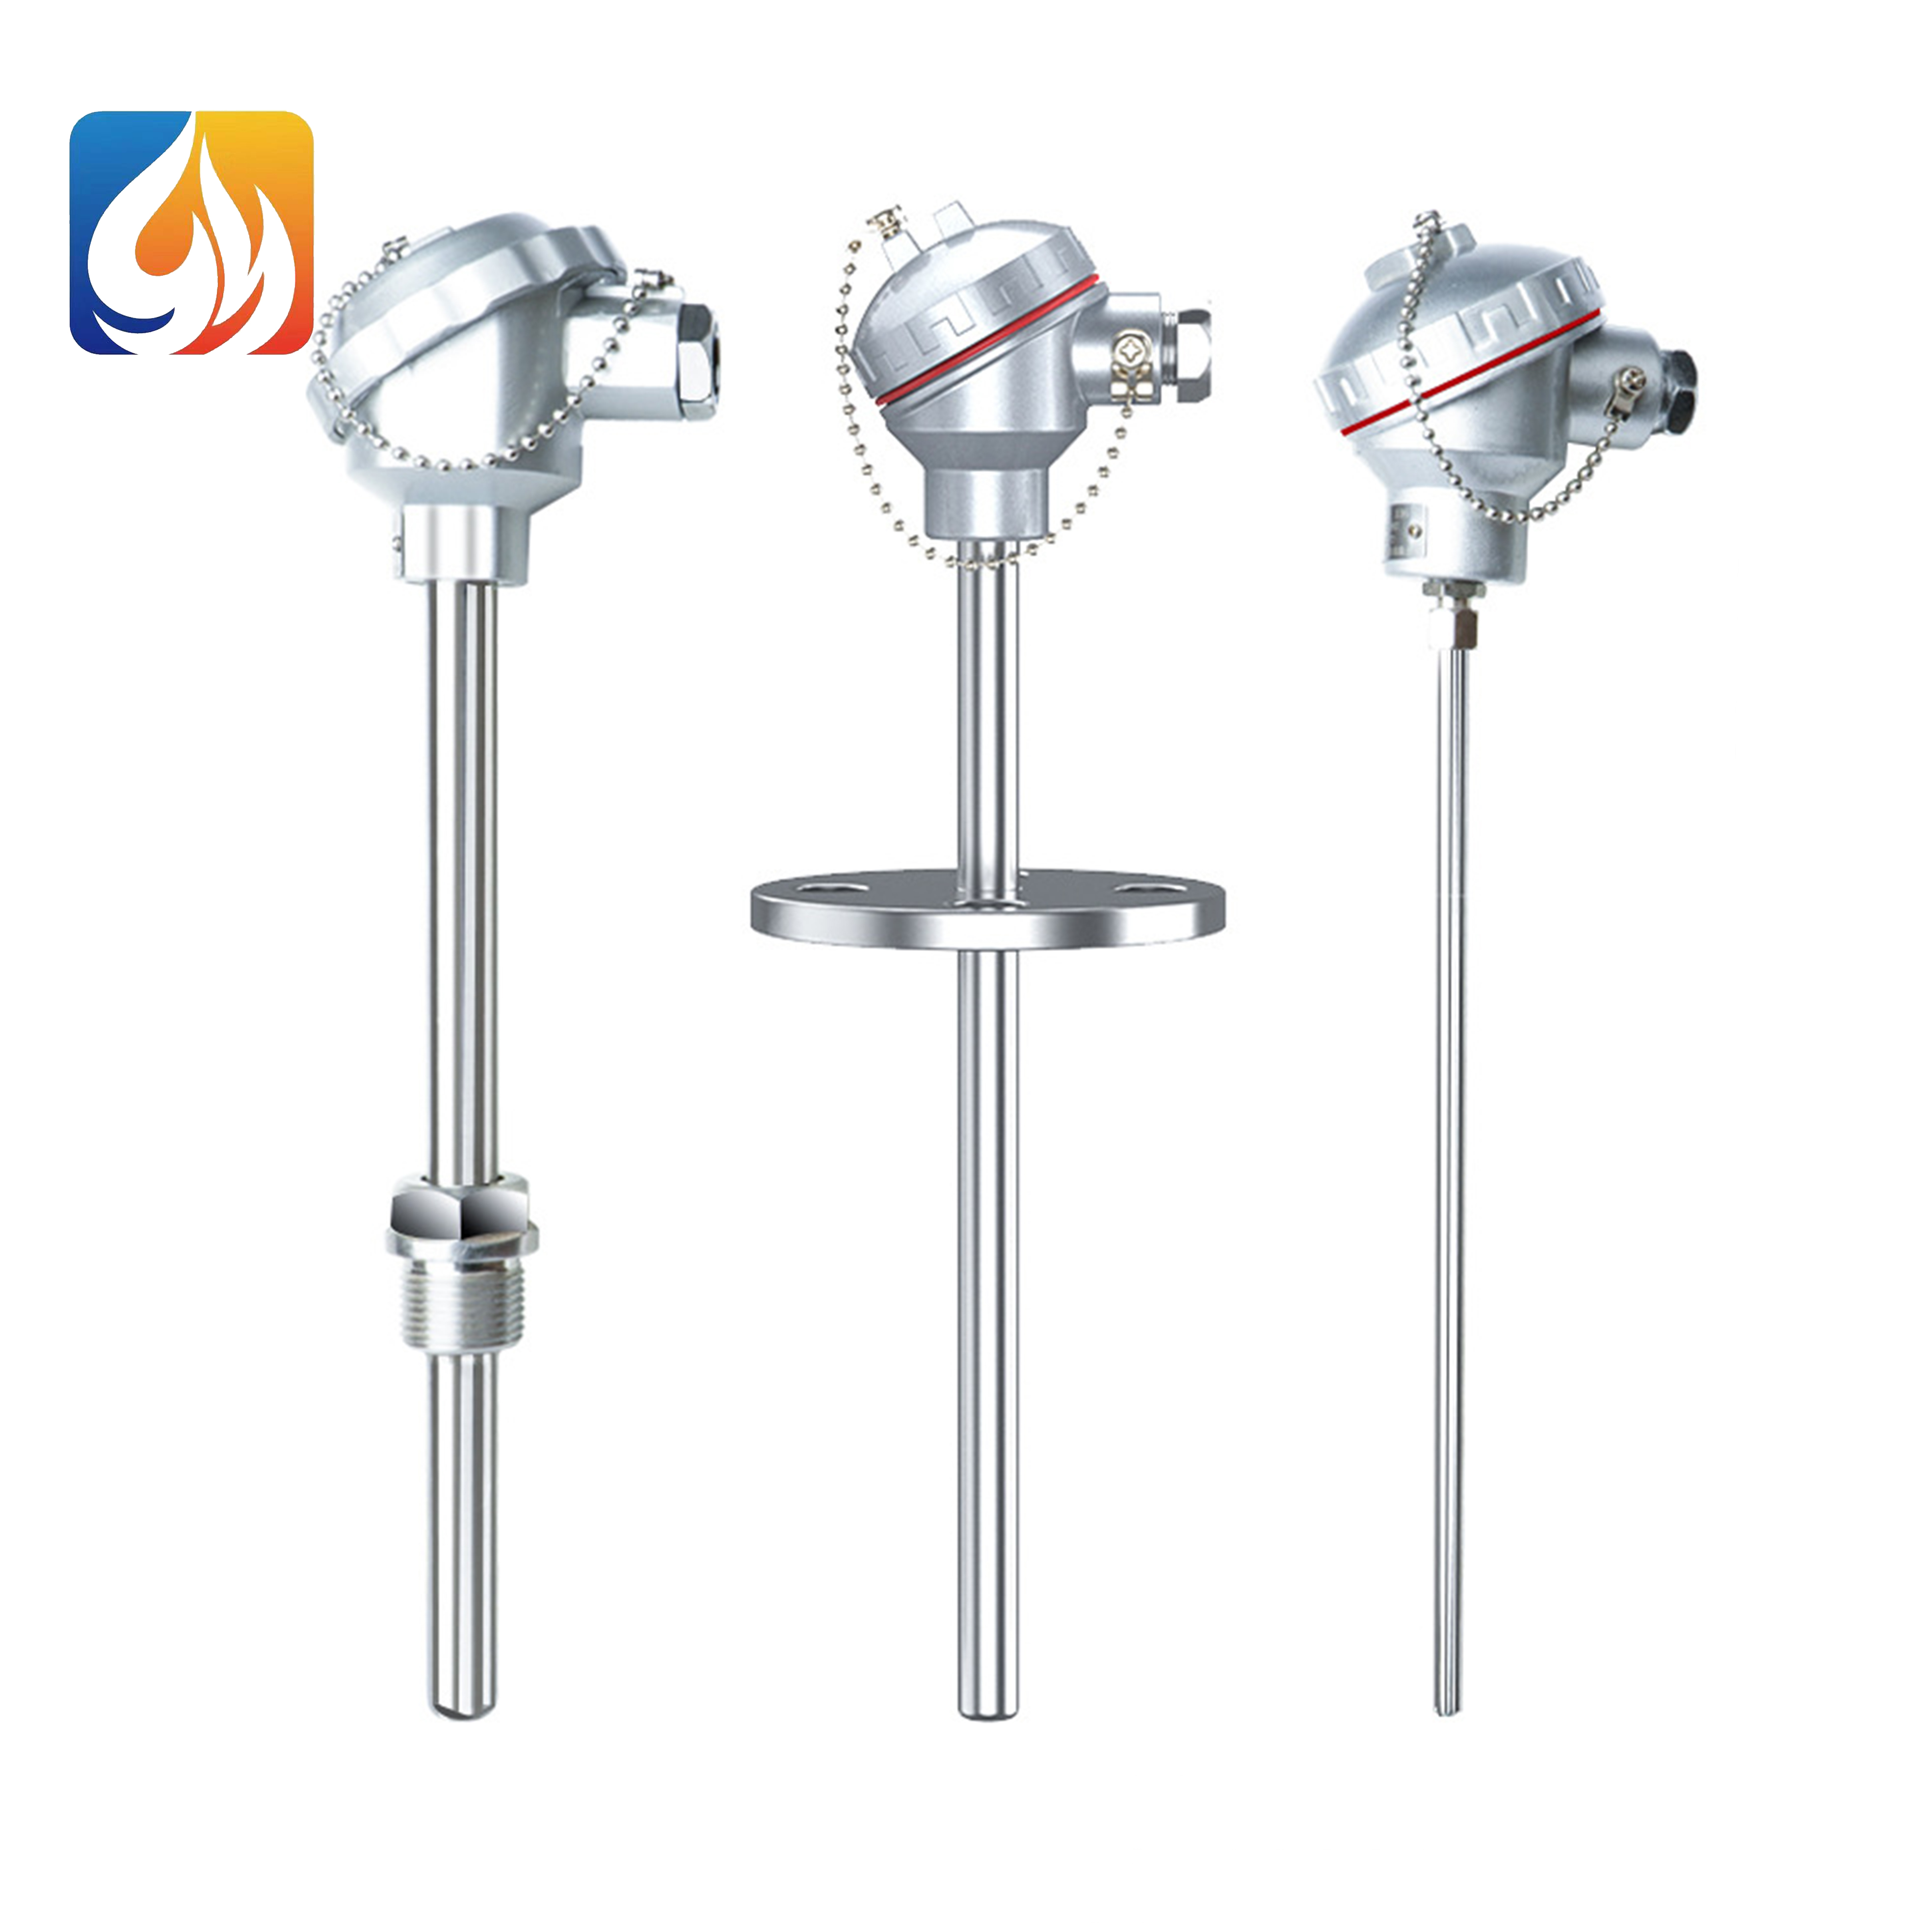 high quality industrial Stainless steel rtd pt100 thermocouple temperature sensor Featured Image